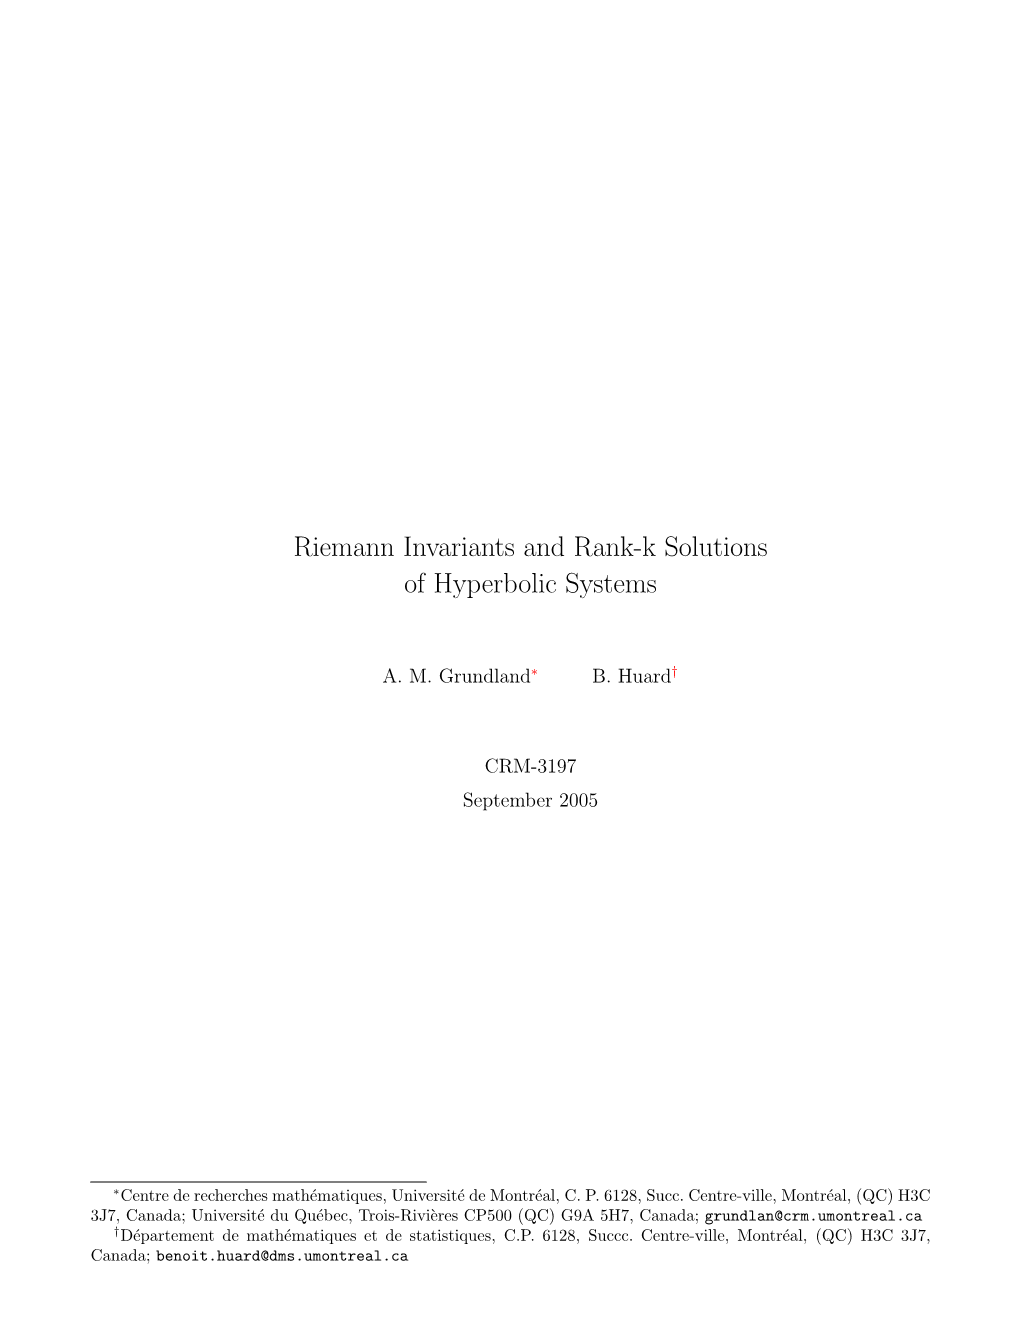 Riemann Invariants and Rank-K Solutions of Hyperbolic Systems